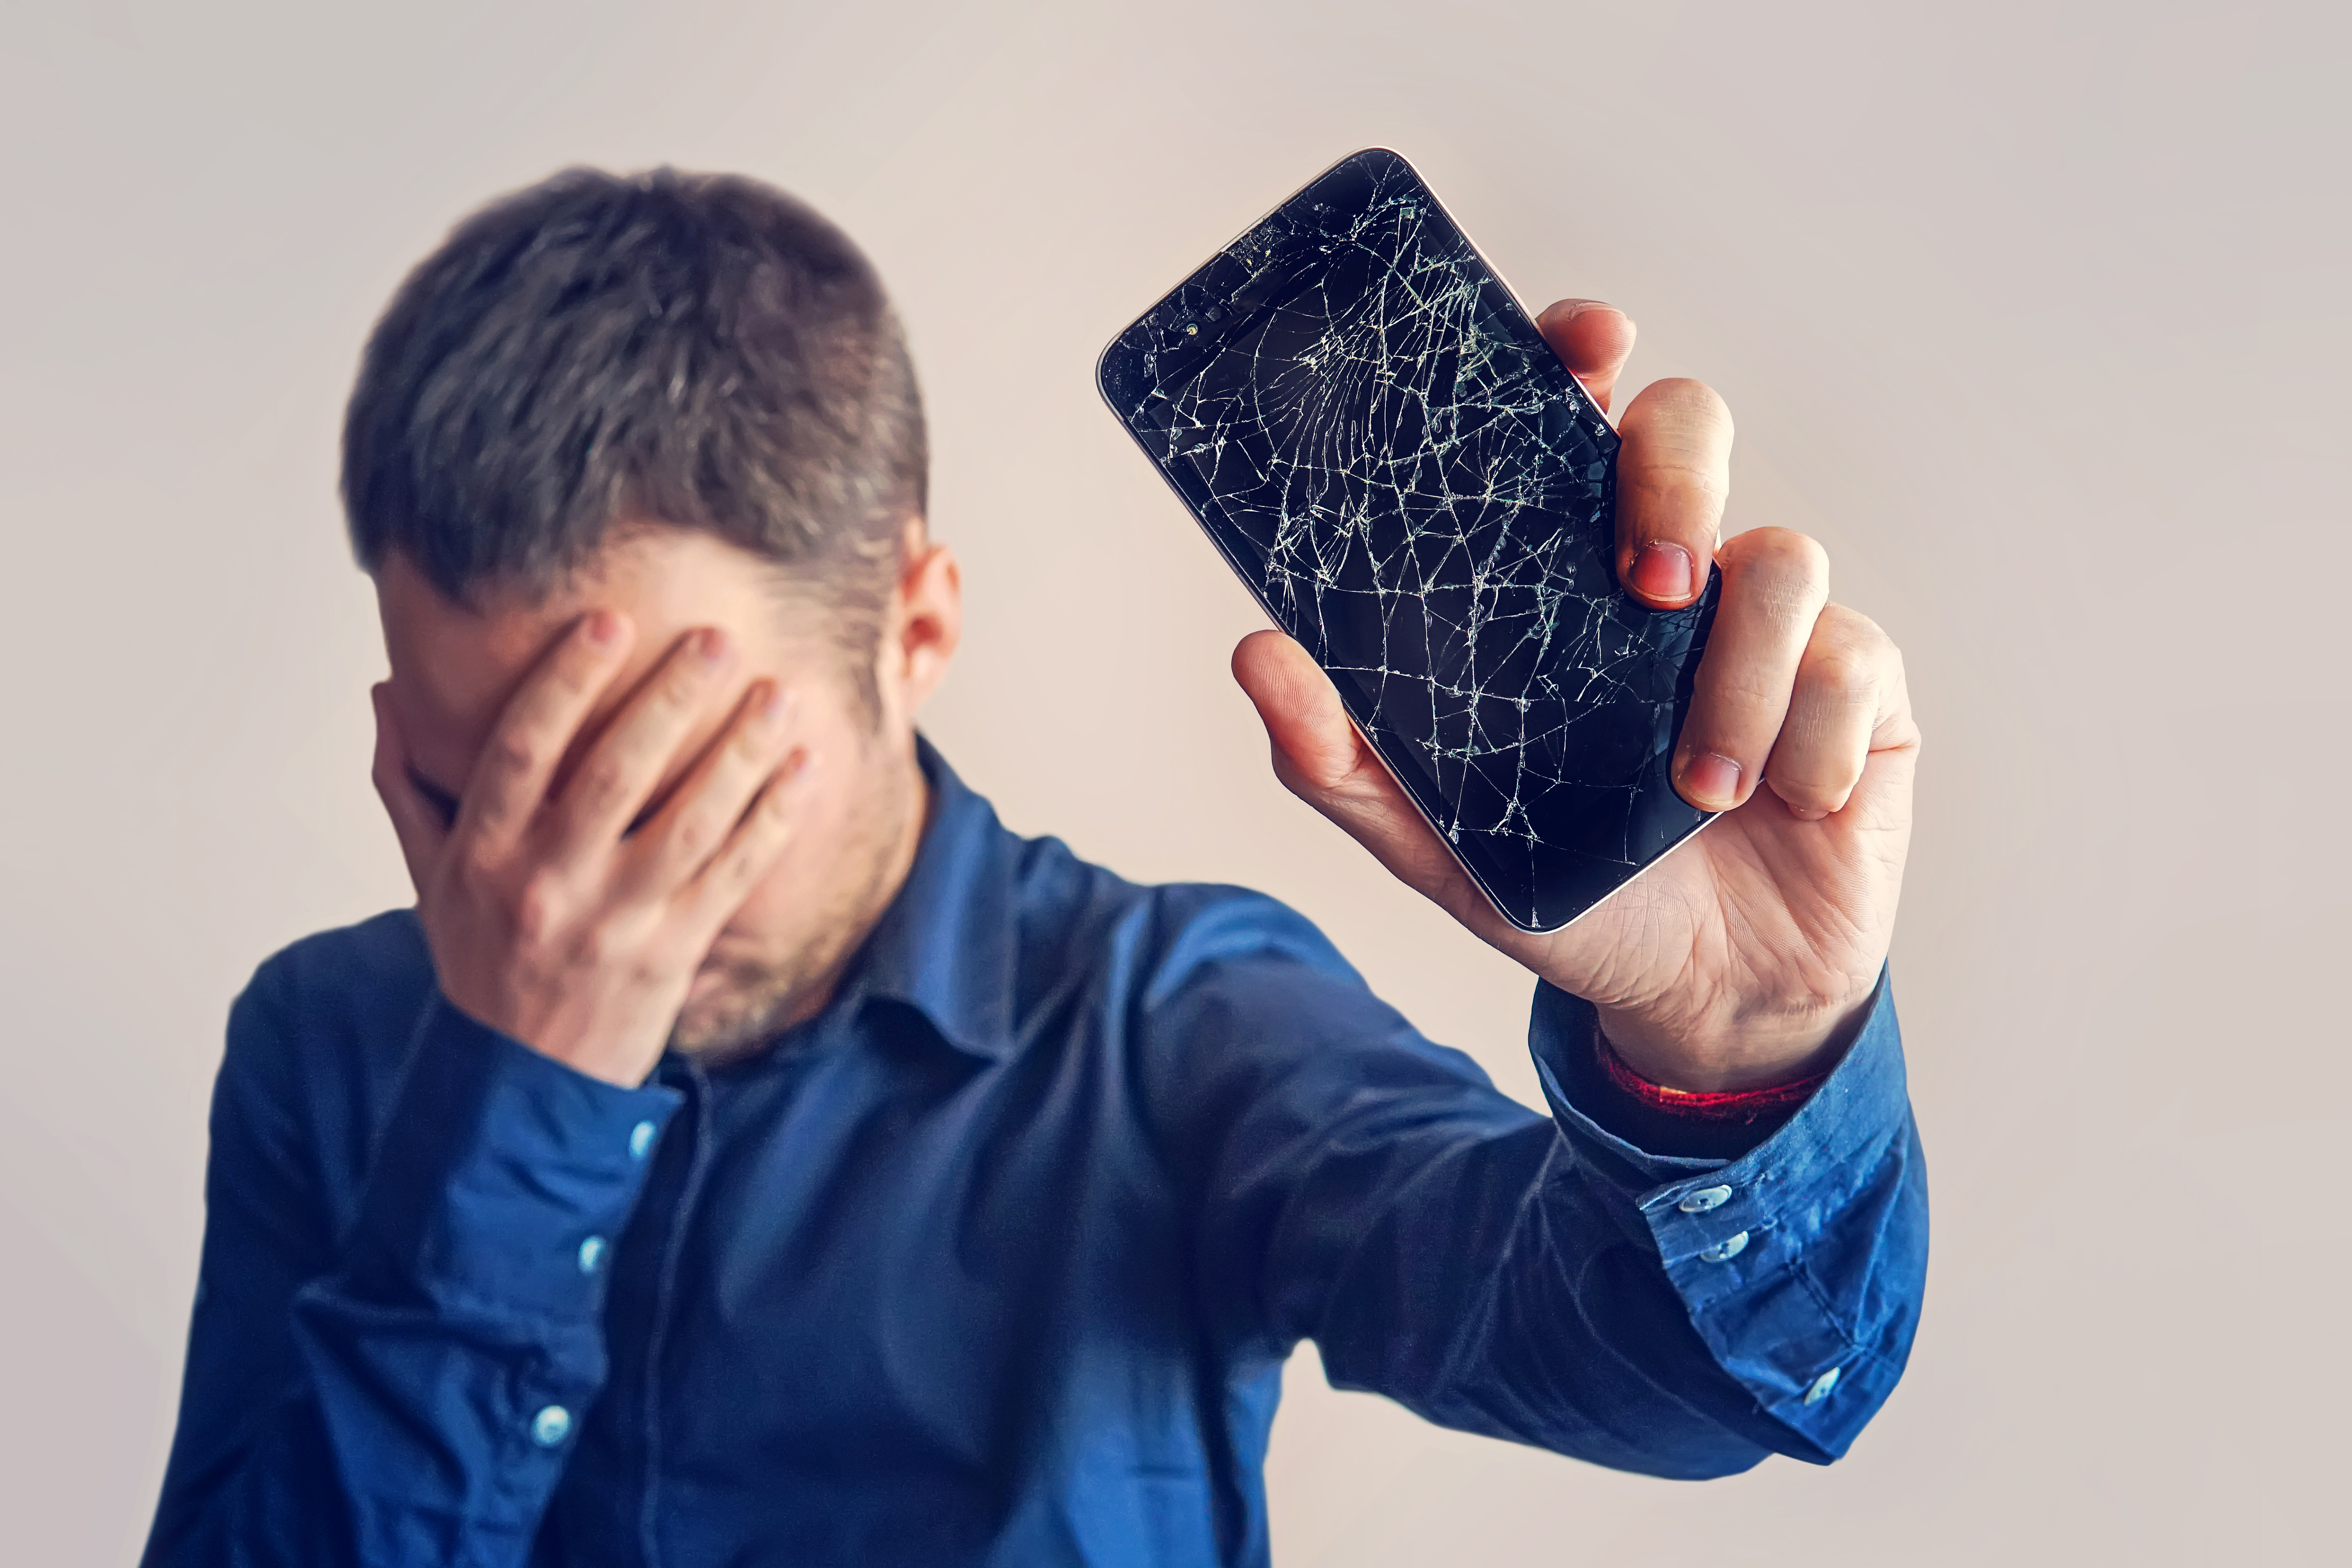 A guy holding a phone with a broken screen | Source: Shutterstock